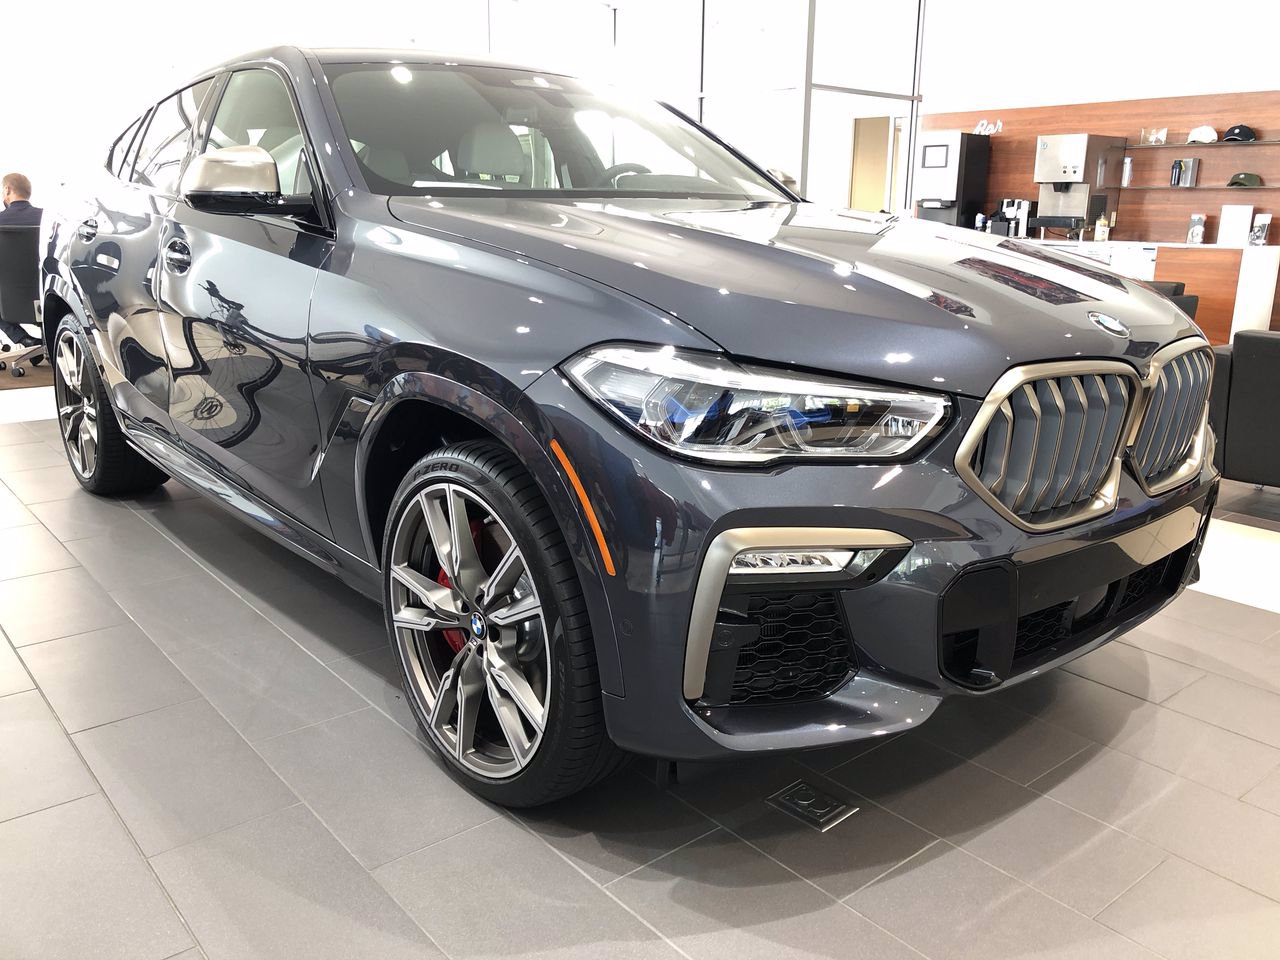 New 2021 BMW X6 M50i Sport Utility in Fayetteville #WD94000 | Superior